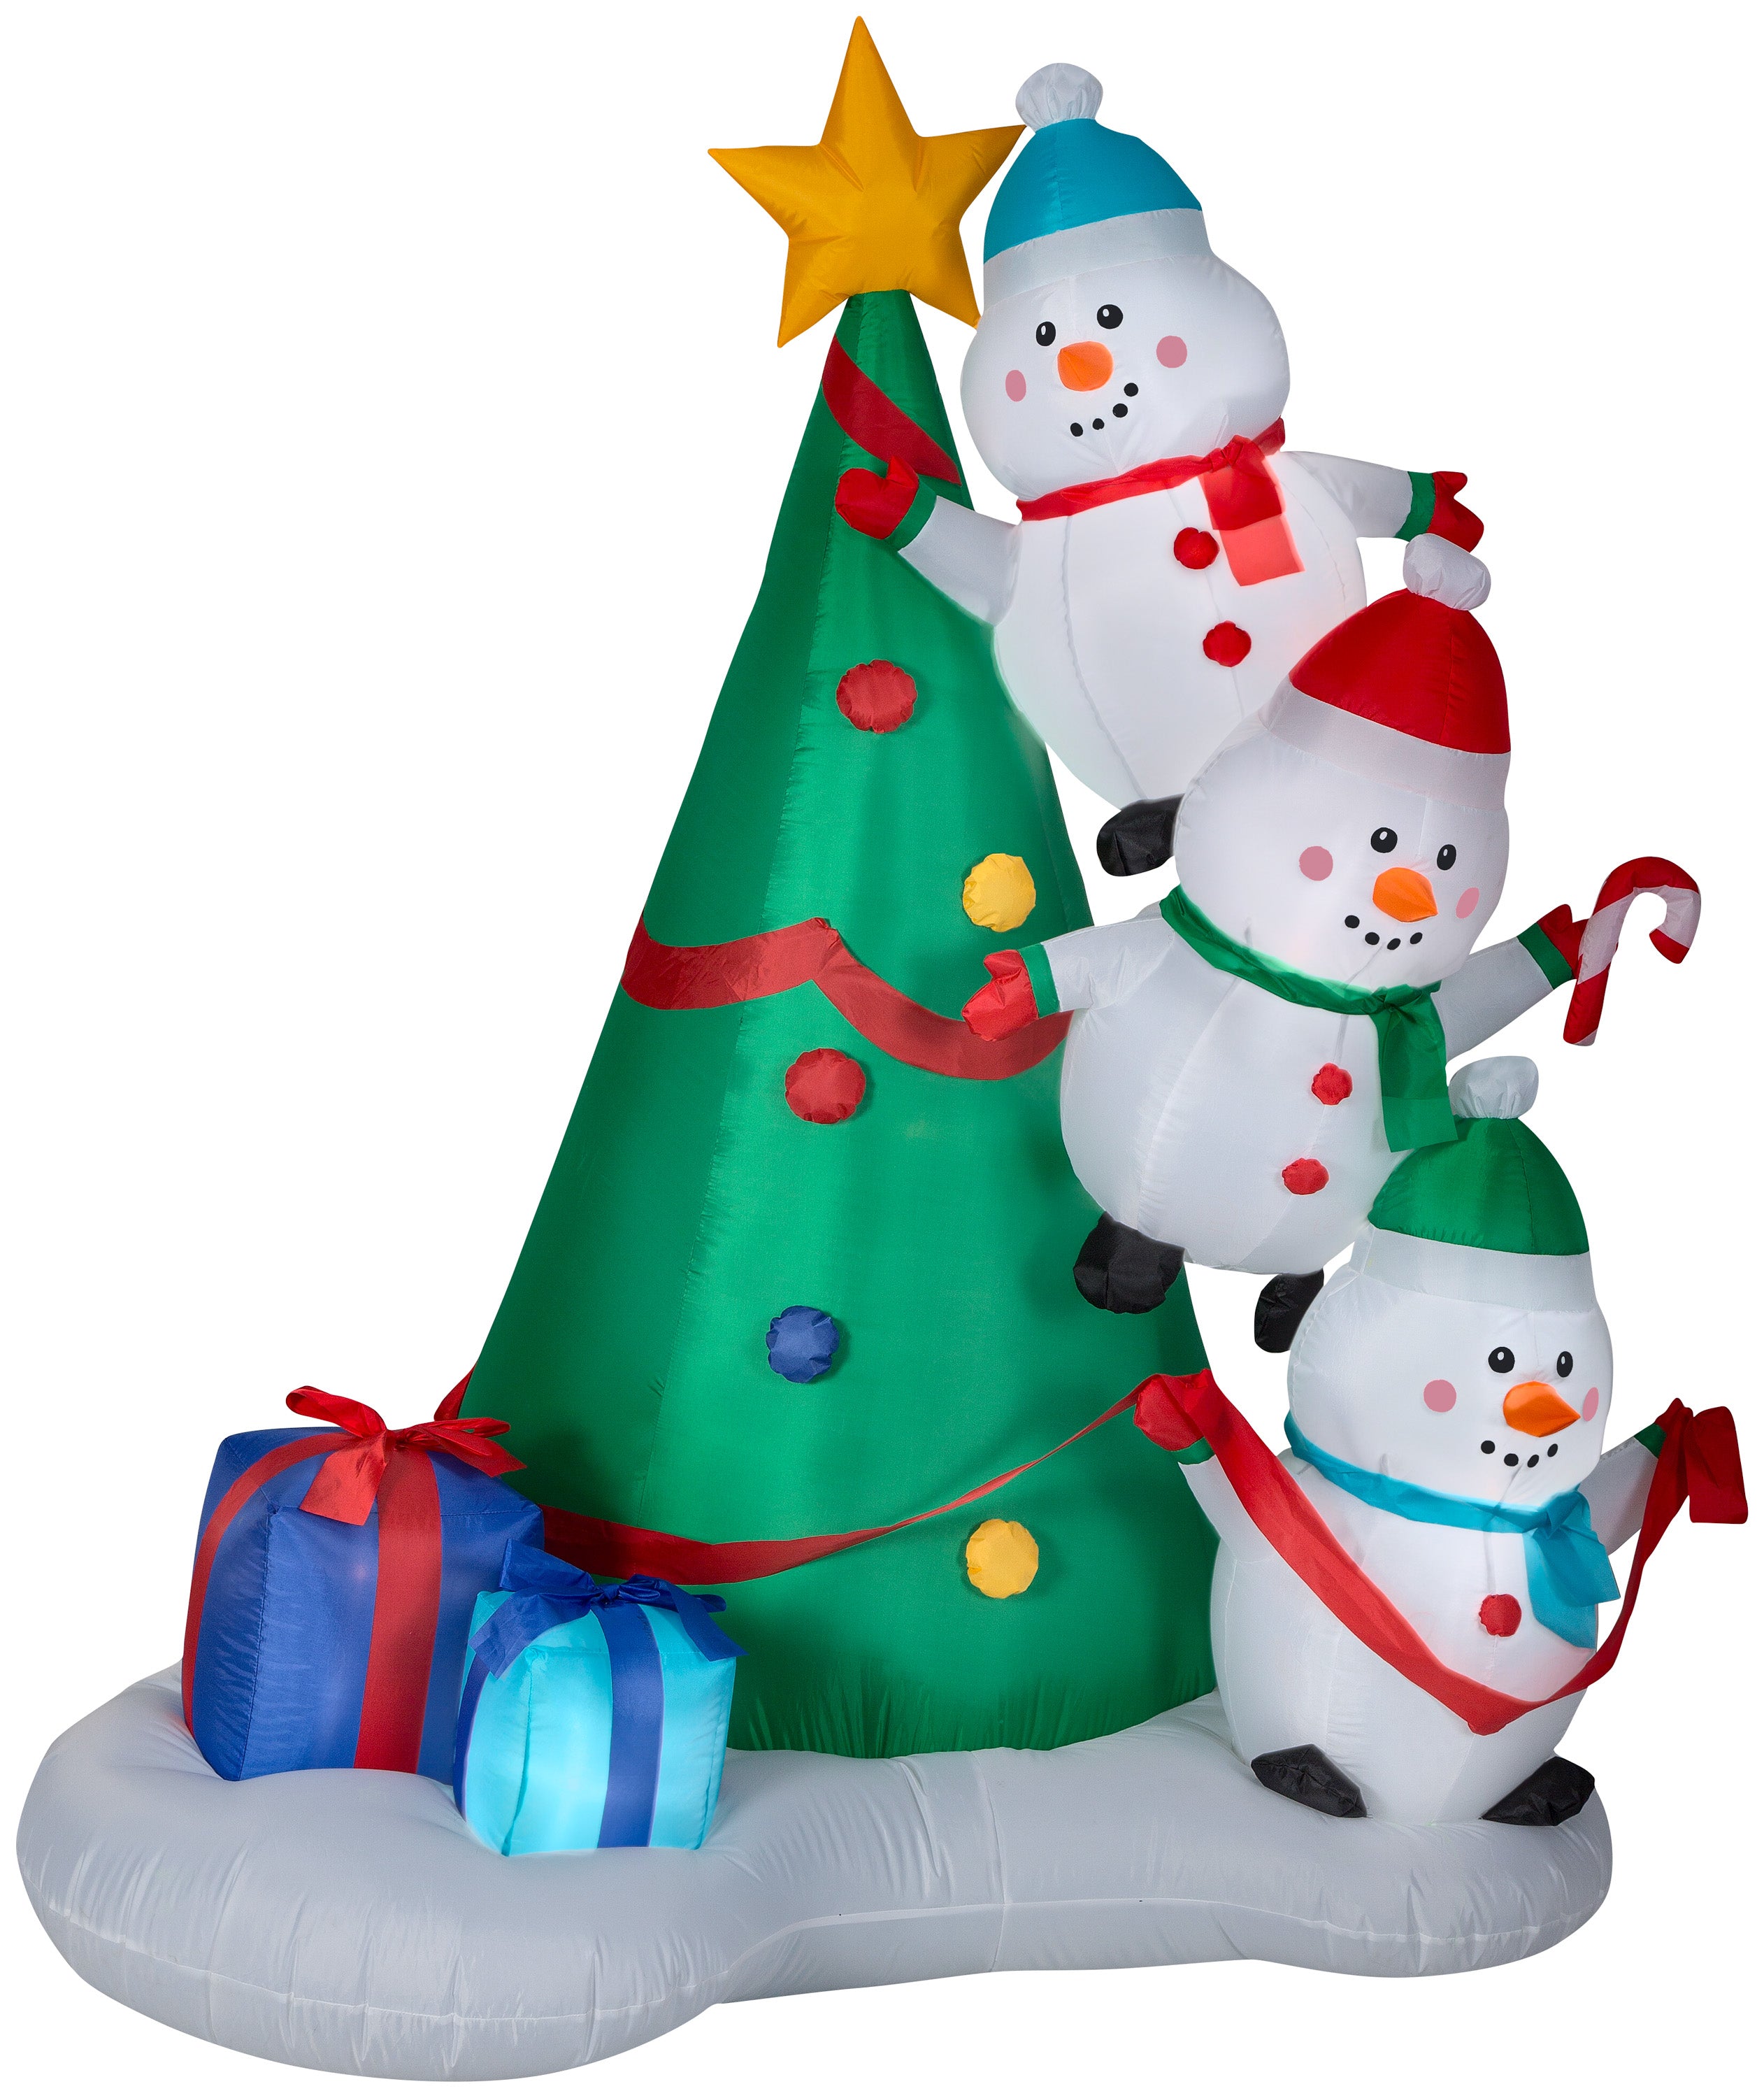 6' Airblown Snowman Decorating Christmas Tree Scene Christmas Inflatable